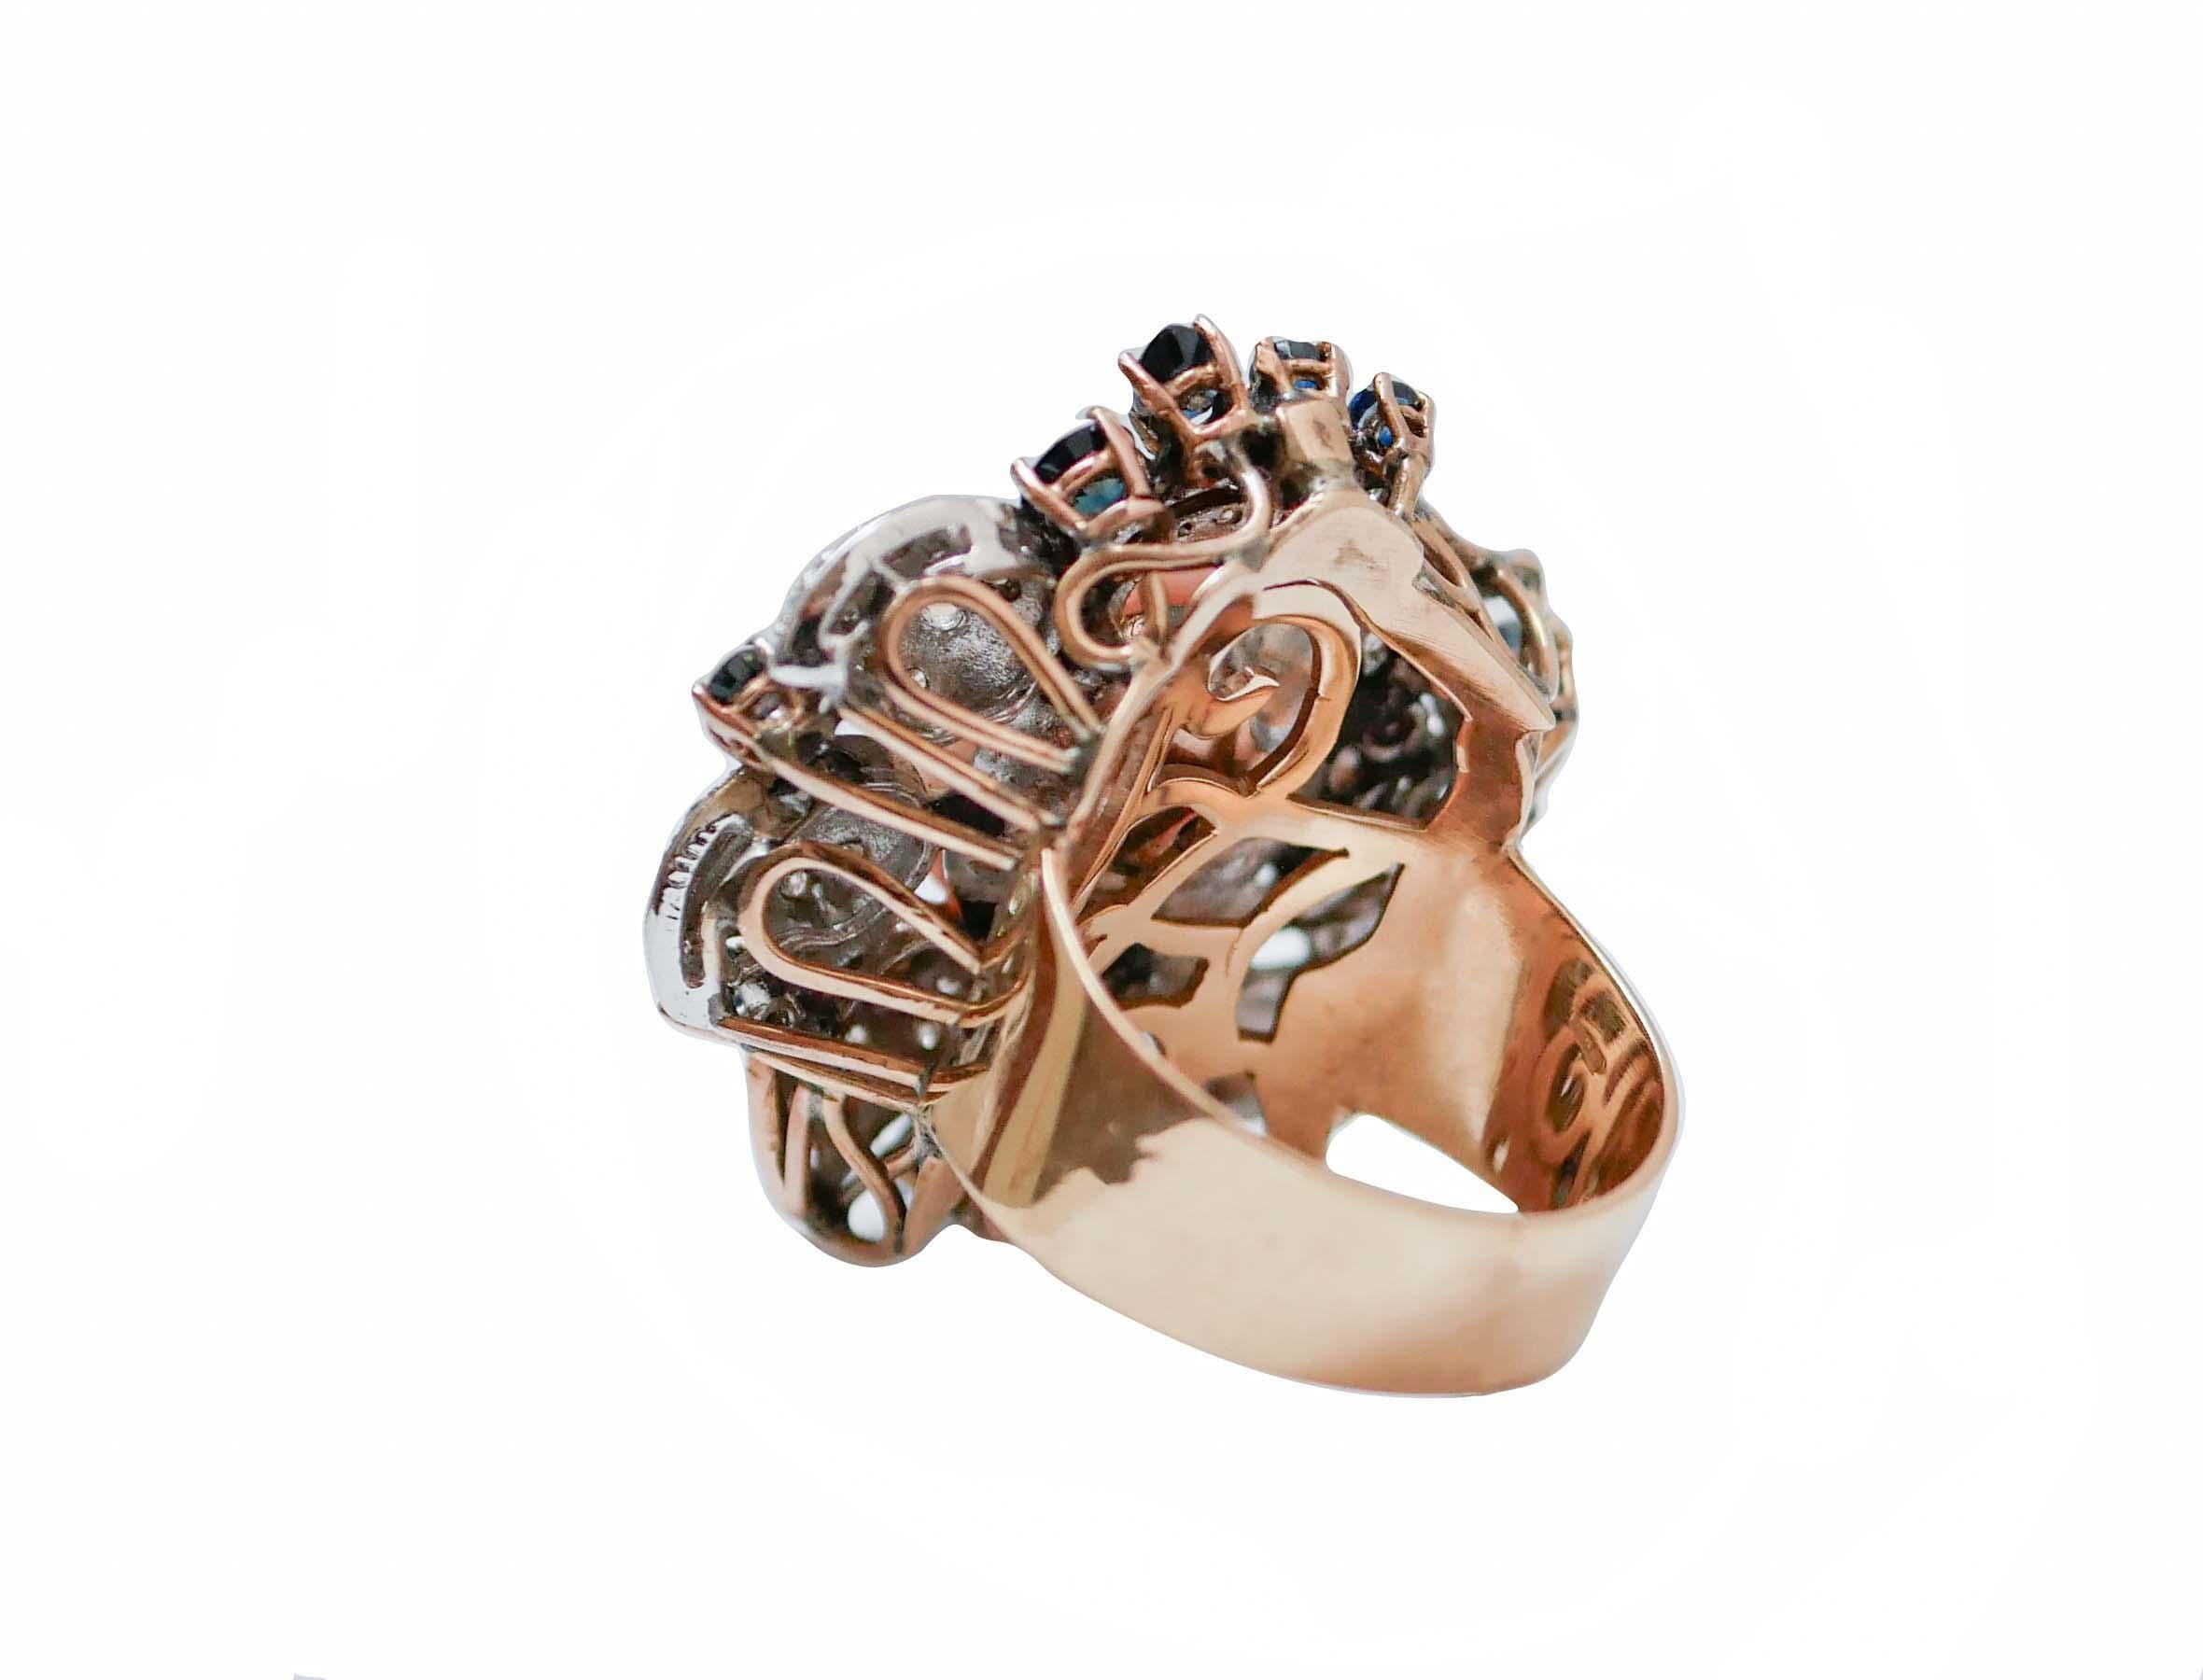 Mixed Cut Coral, Sapphires, Diamonds, 14 Karat Rose Gold and White Gold Ring. For Sale